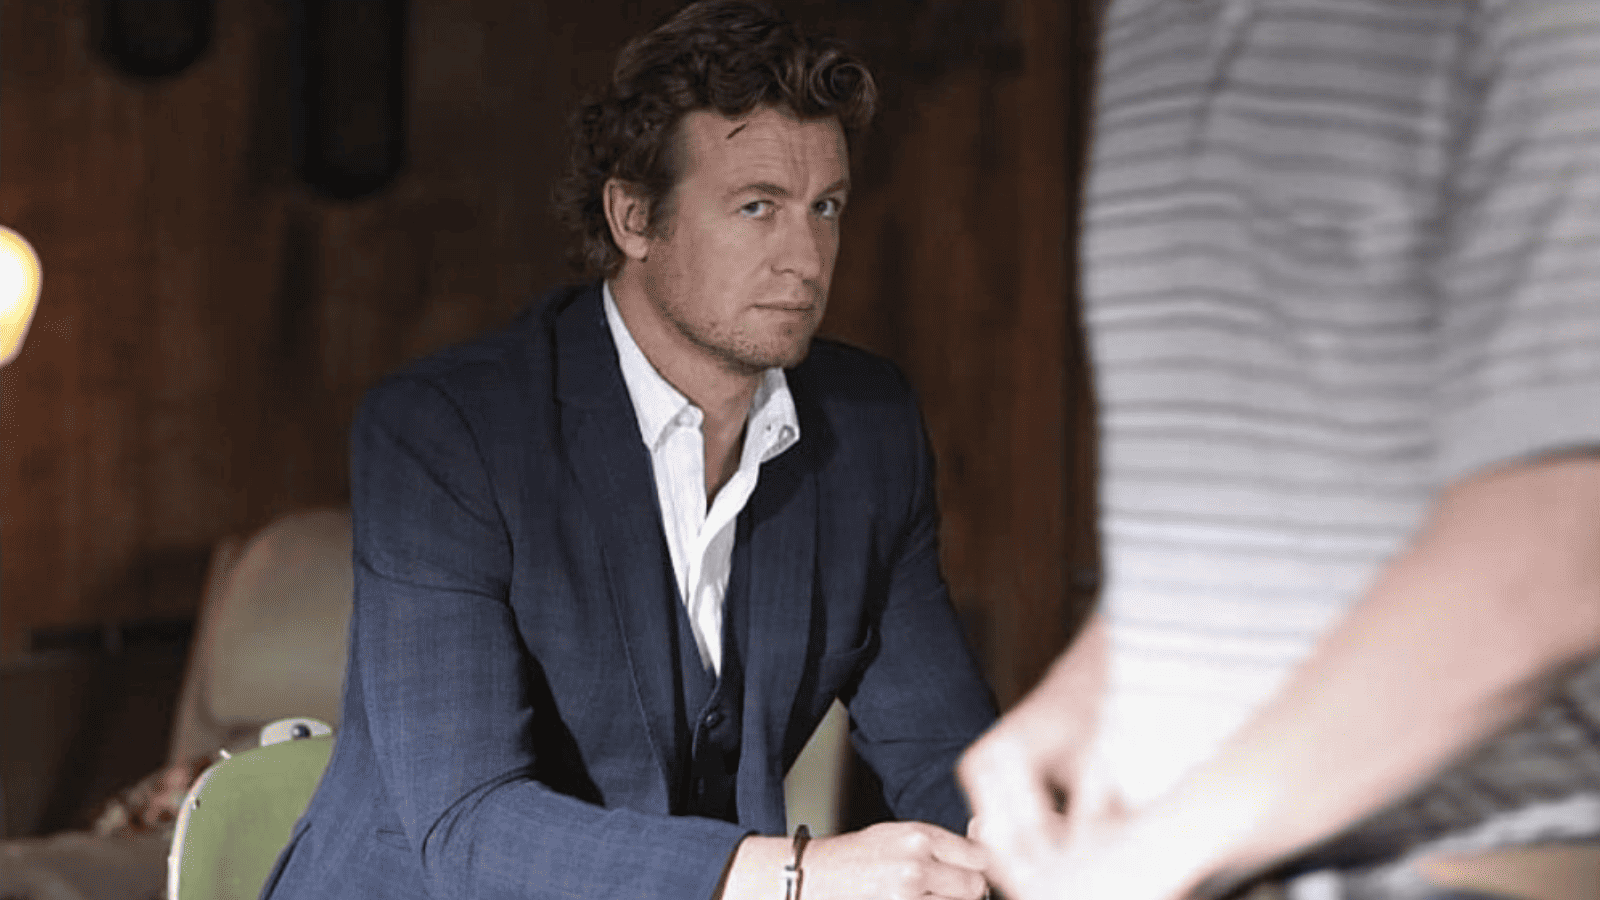 Patrick Jane from The Mentalist